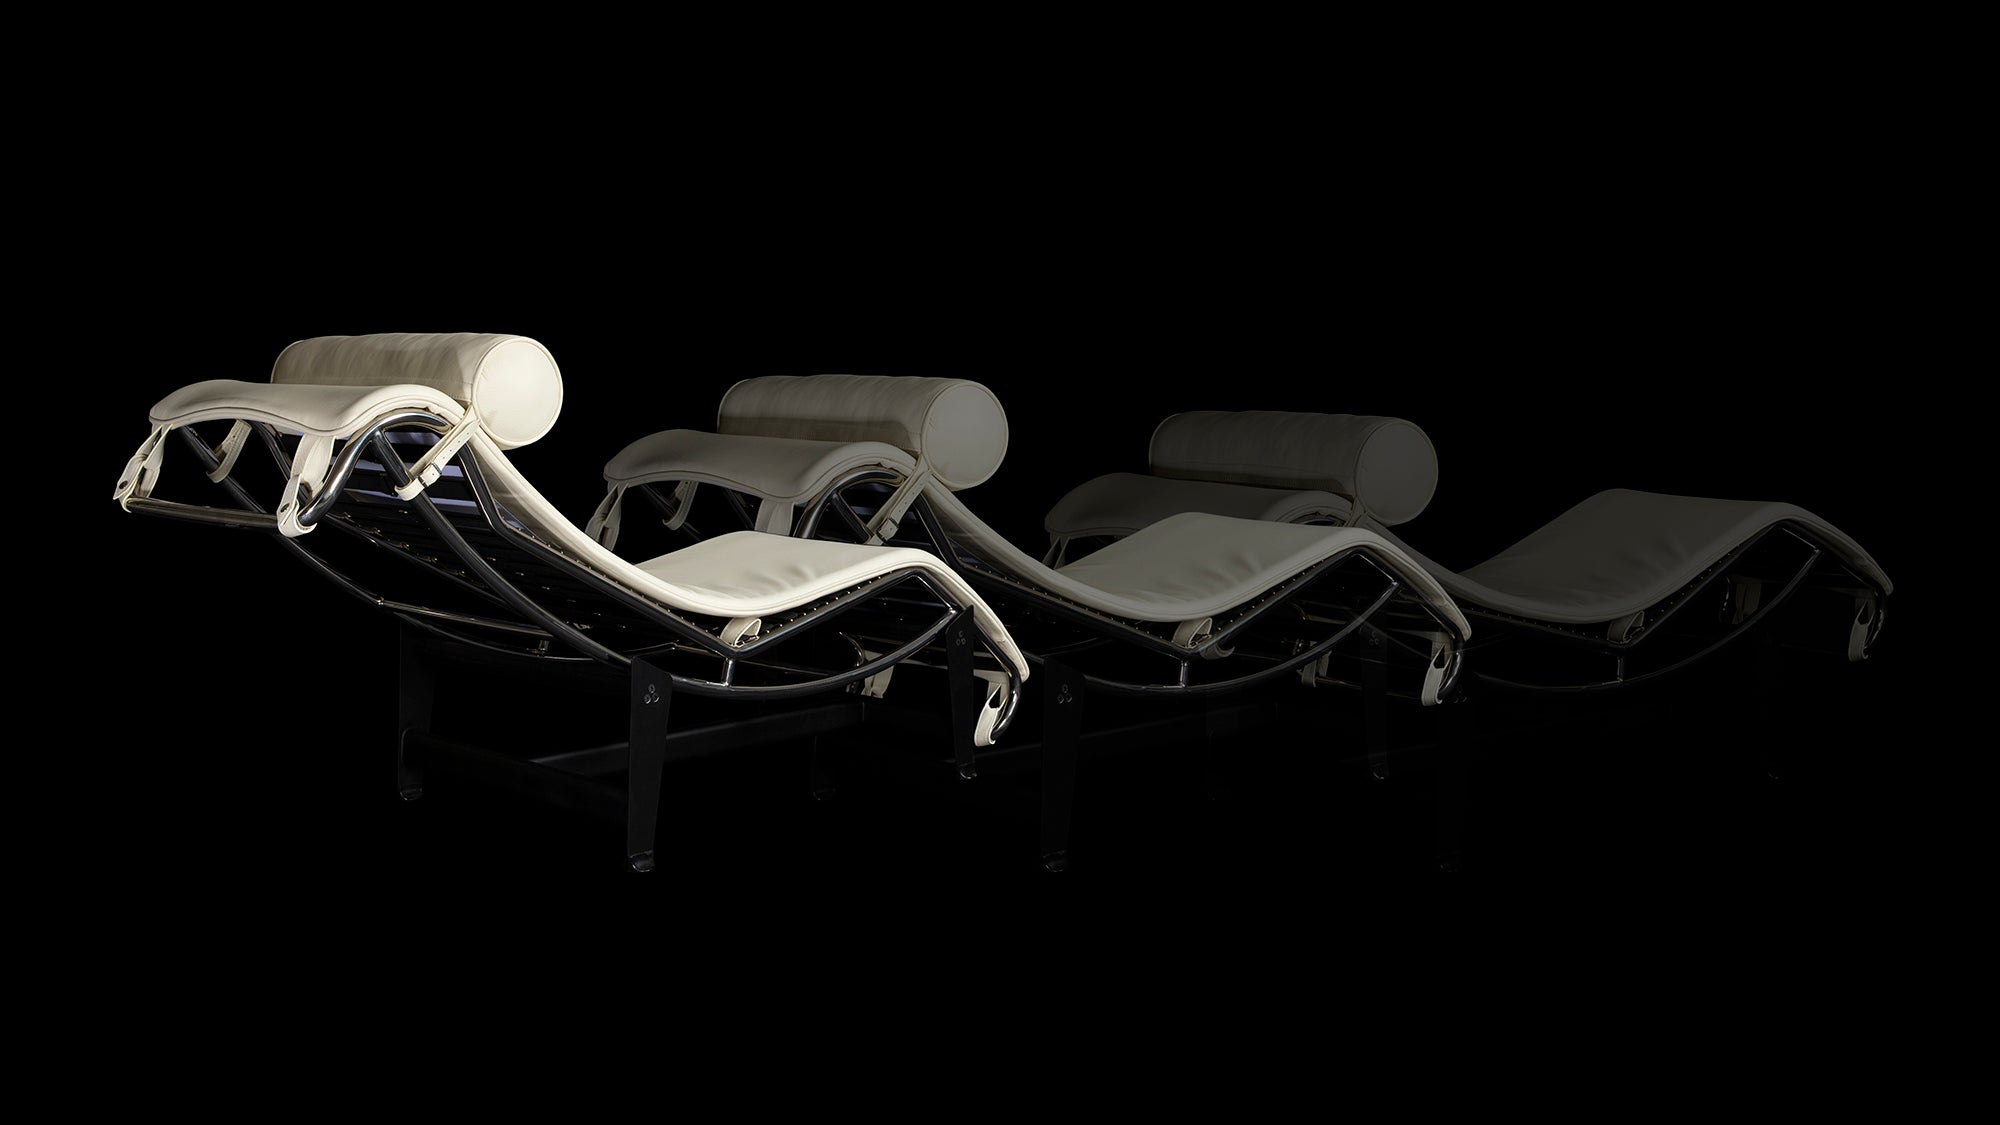 The Corbusier LC4 Chaise Longue in white is seen ghosting across the black background